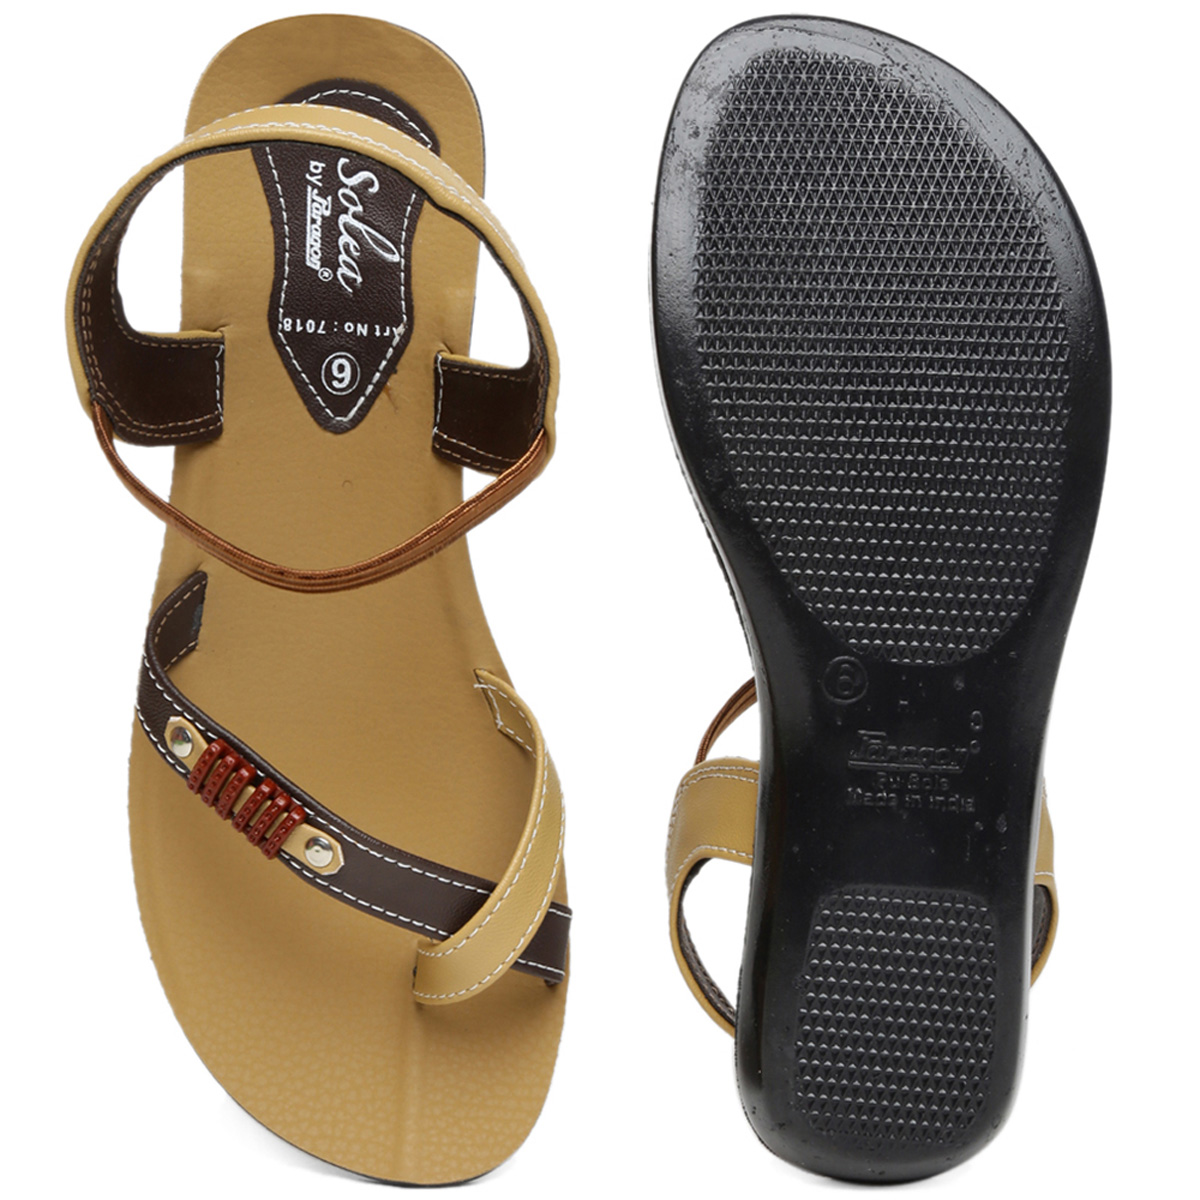 Buy Paragon Women'S Brown Sandals Online @ ₹229 from ShopClues